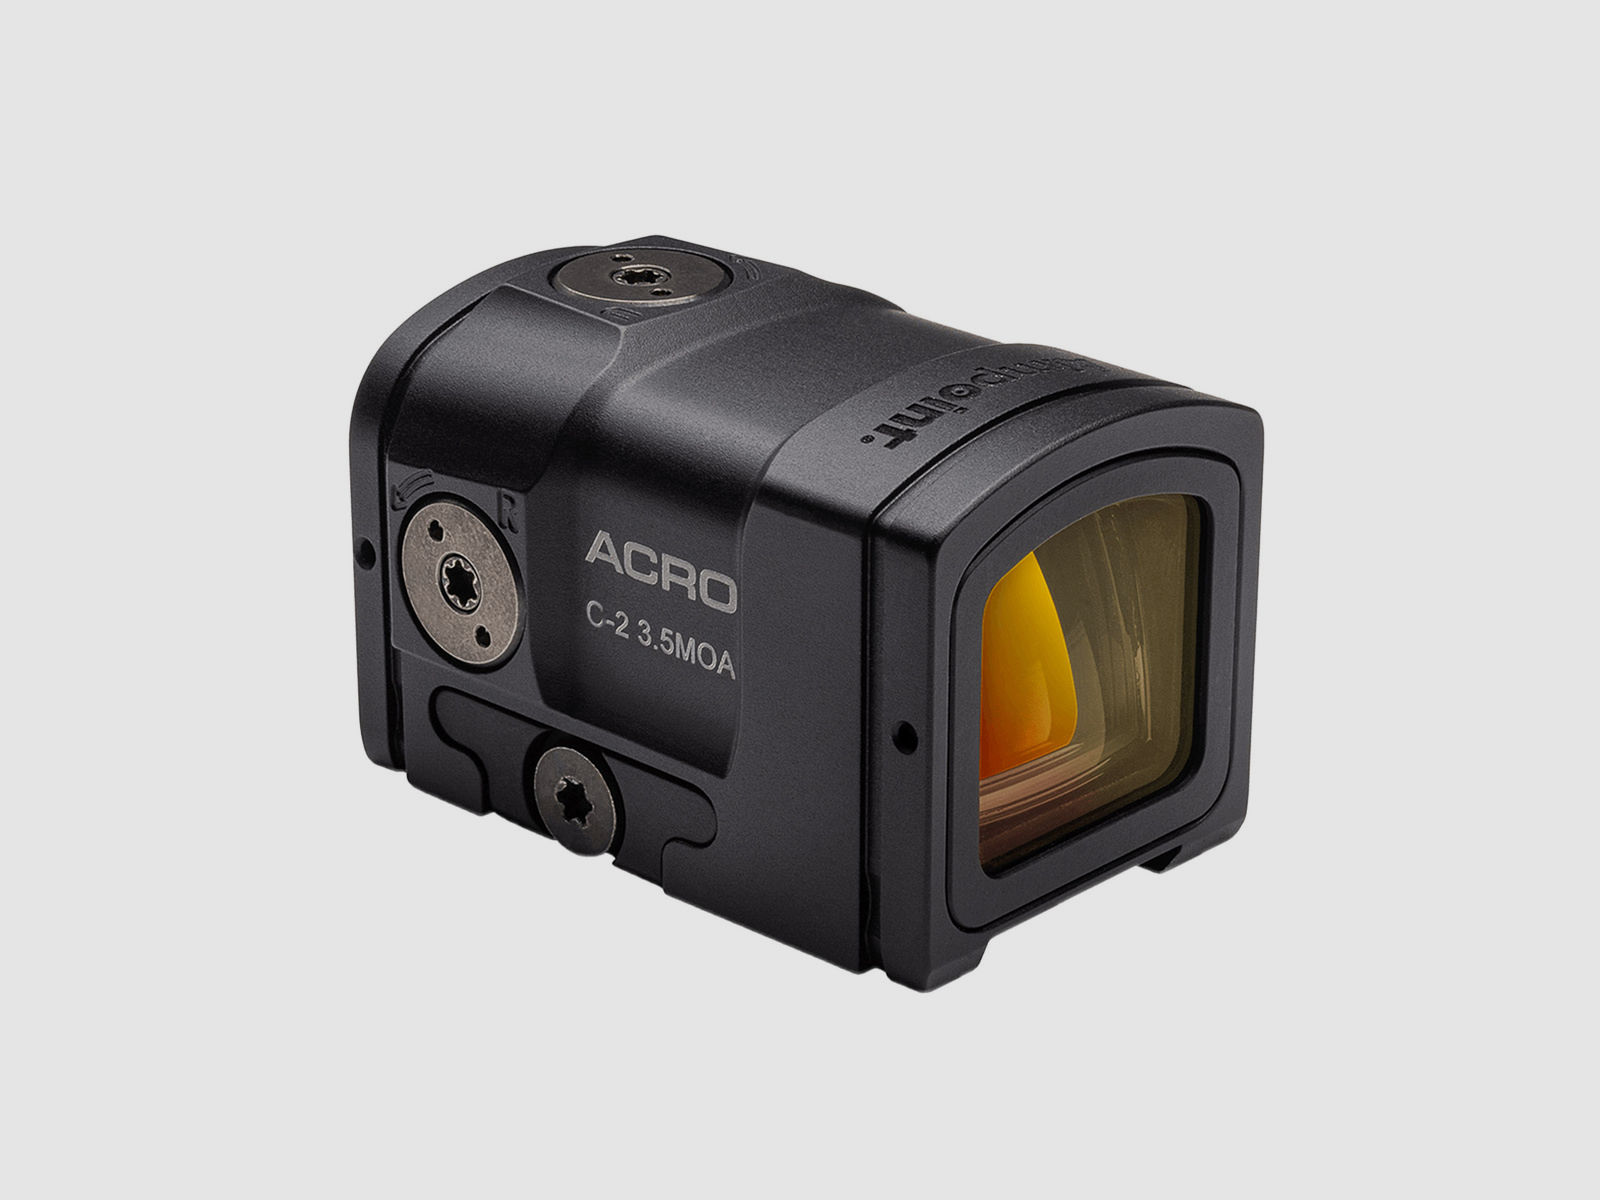 Aimpoint 200754 AP ACRO C-2 3,5 MOA w fixed mount excl LC 682540325